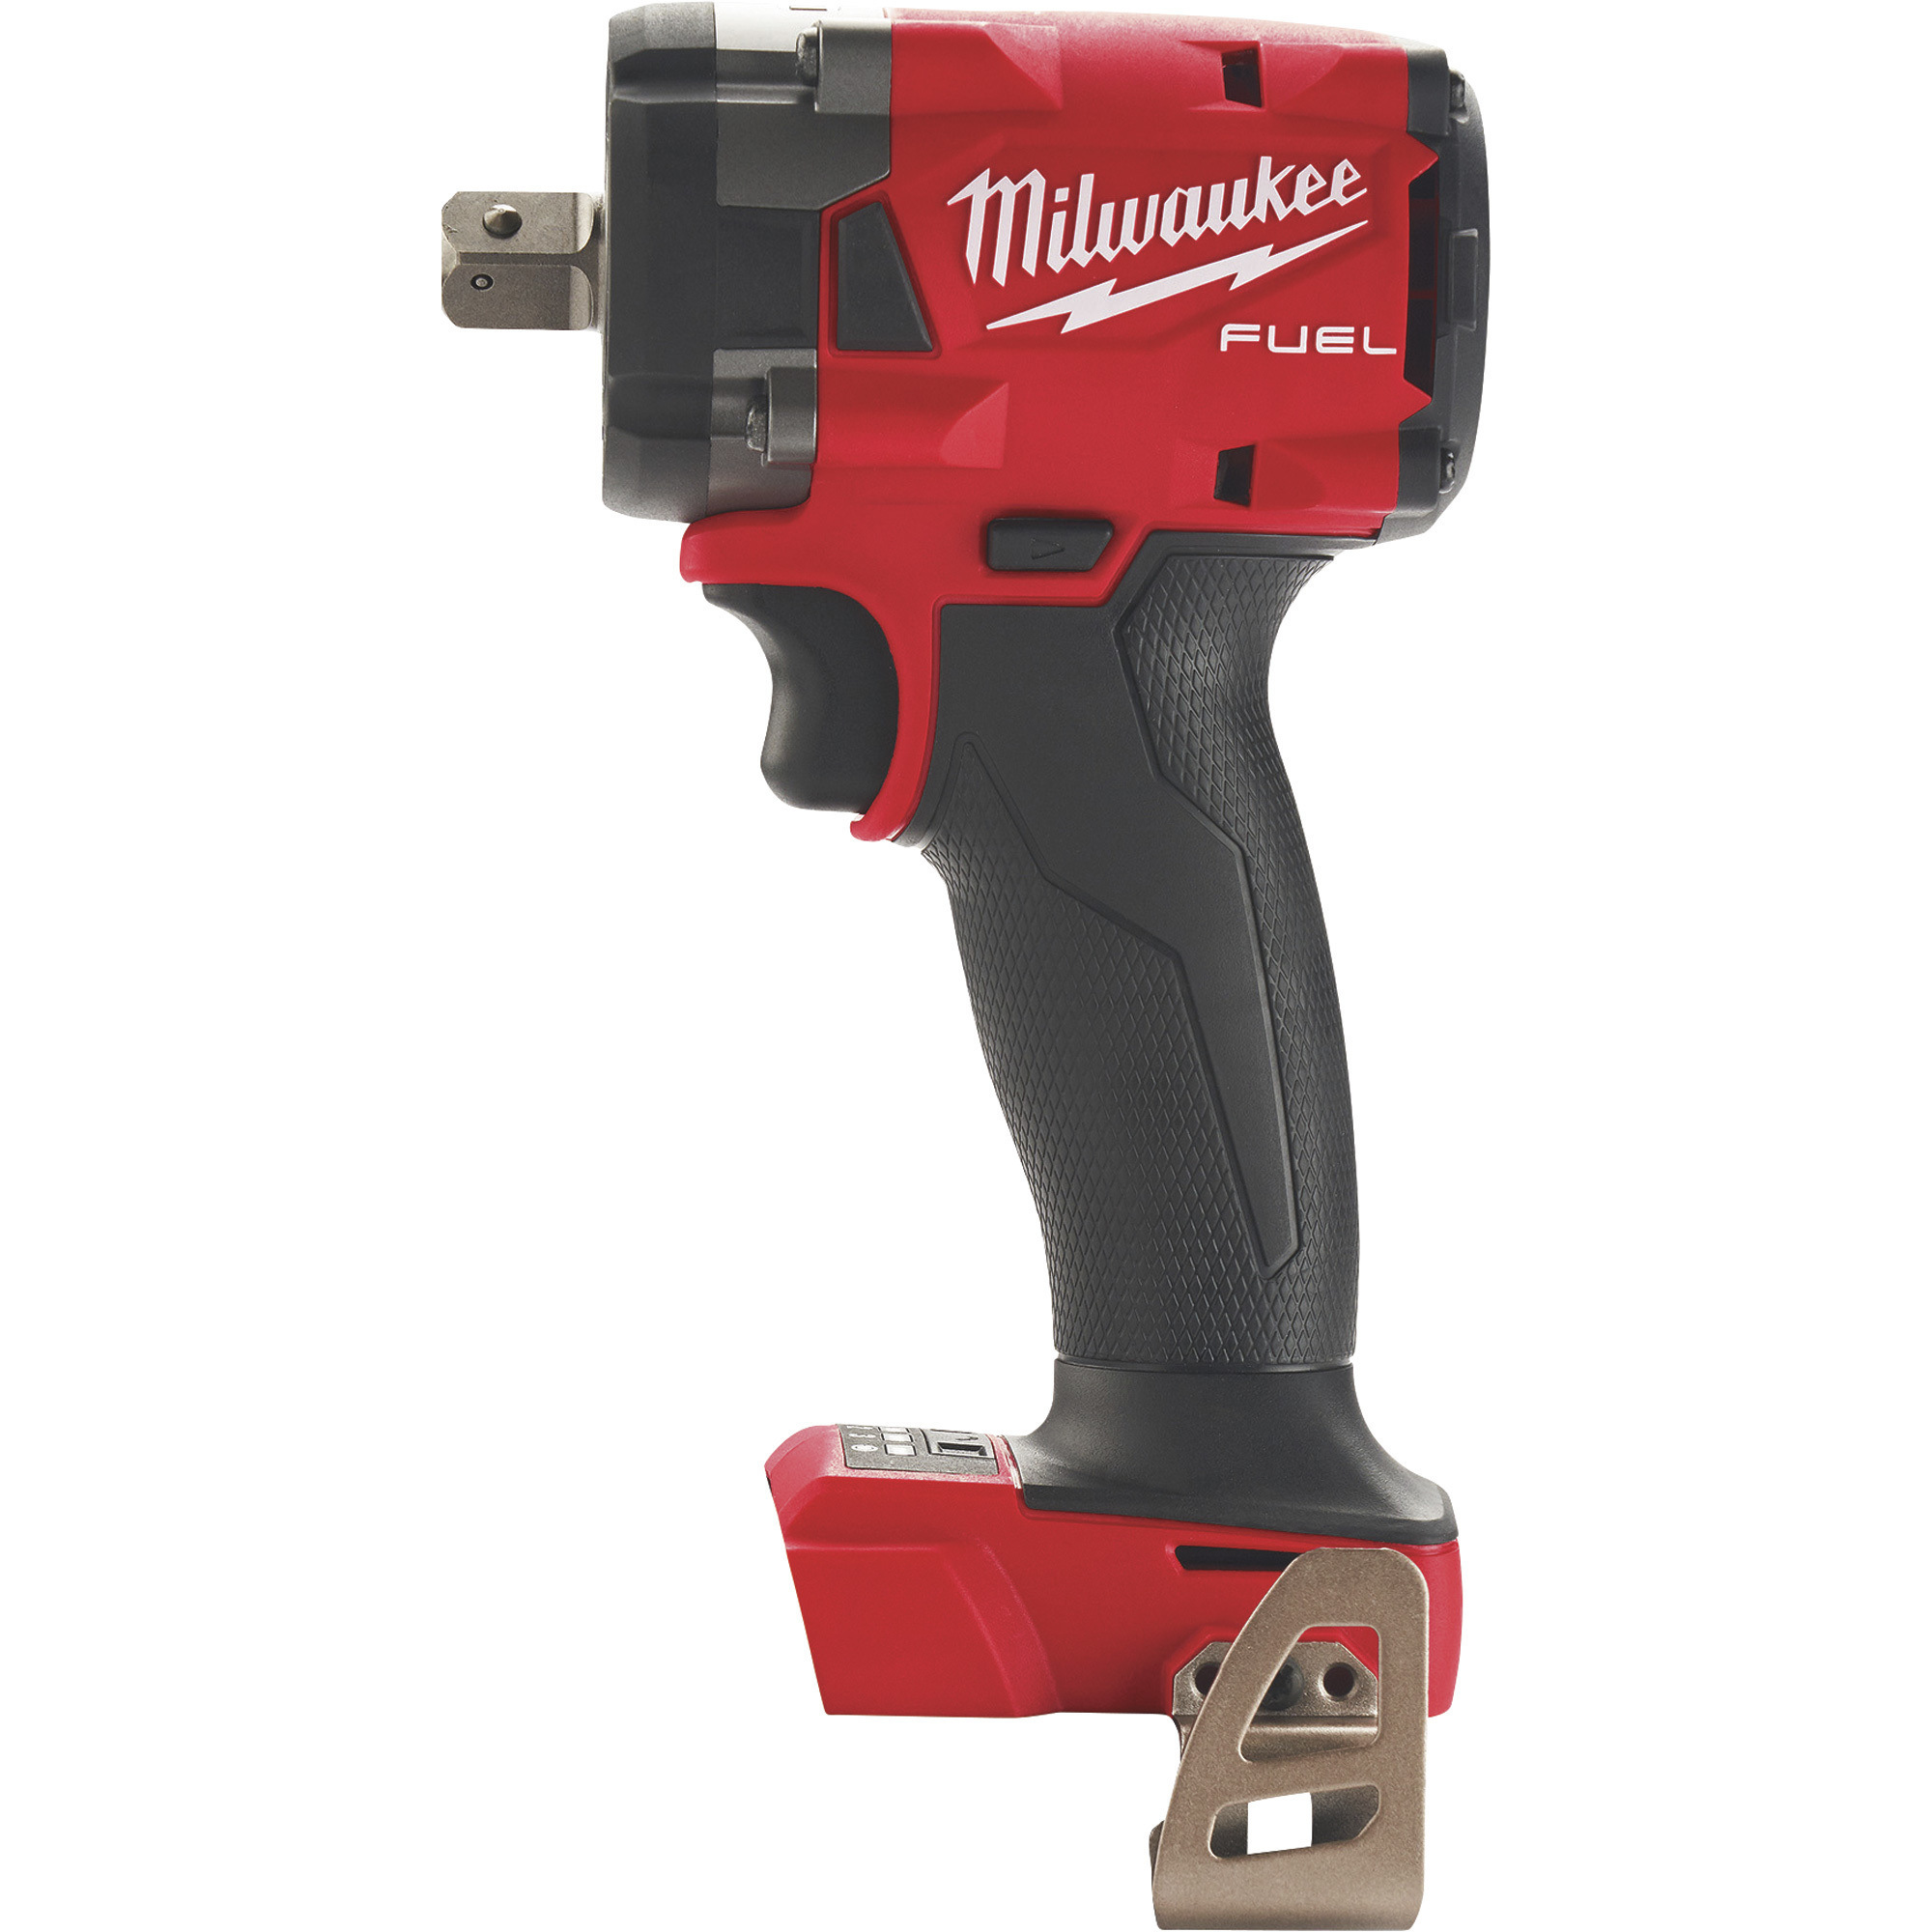 M18 FUEL Compact 1/2in. Impact Wrench with Pin Detent - Tool Only, Model - Milwaukee 2855P-20